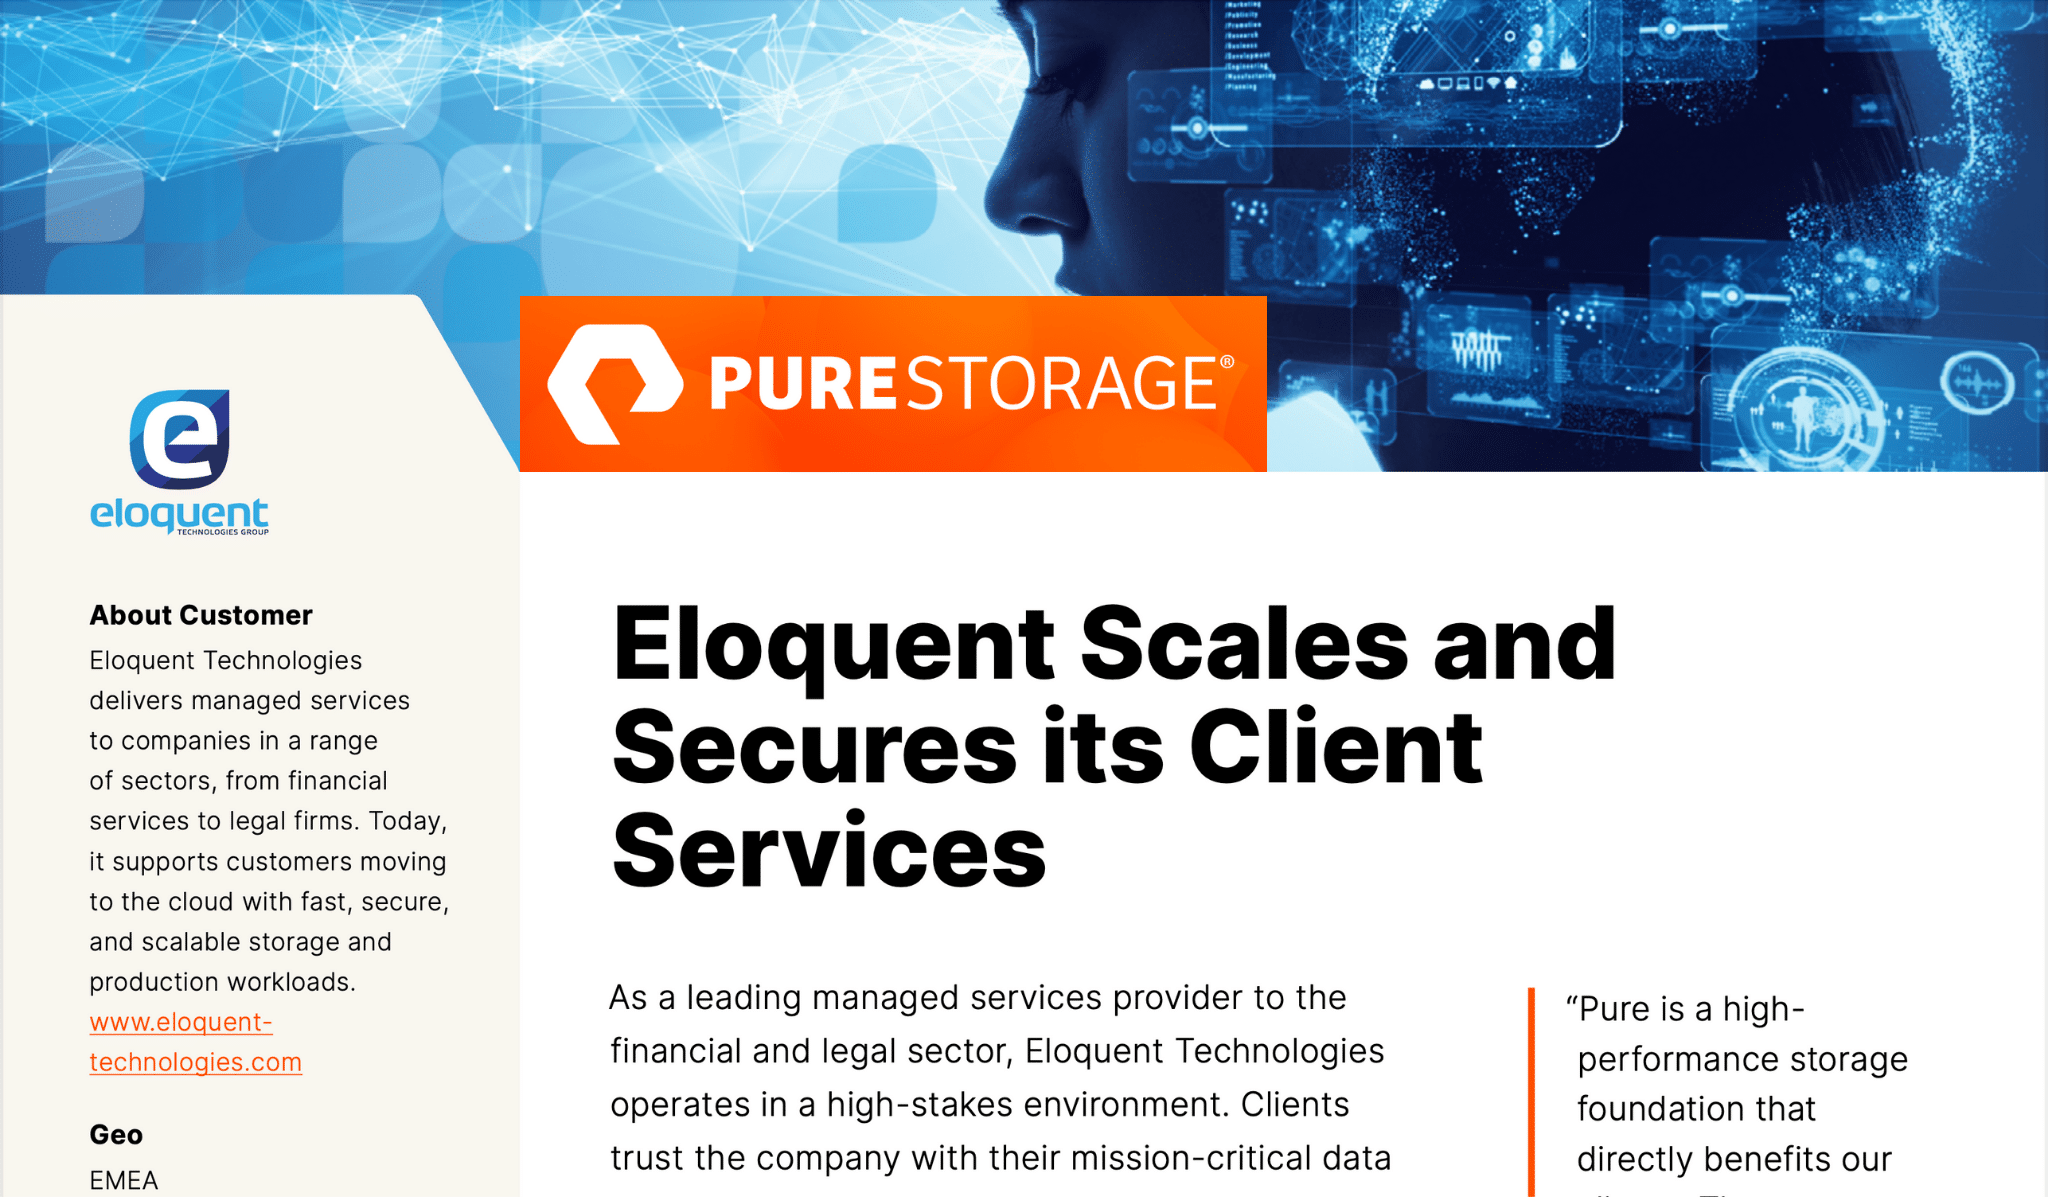 Pure Storage Case Study Image - Eloquent Technologies Group